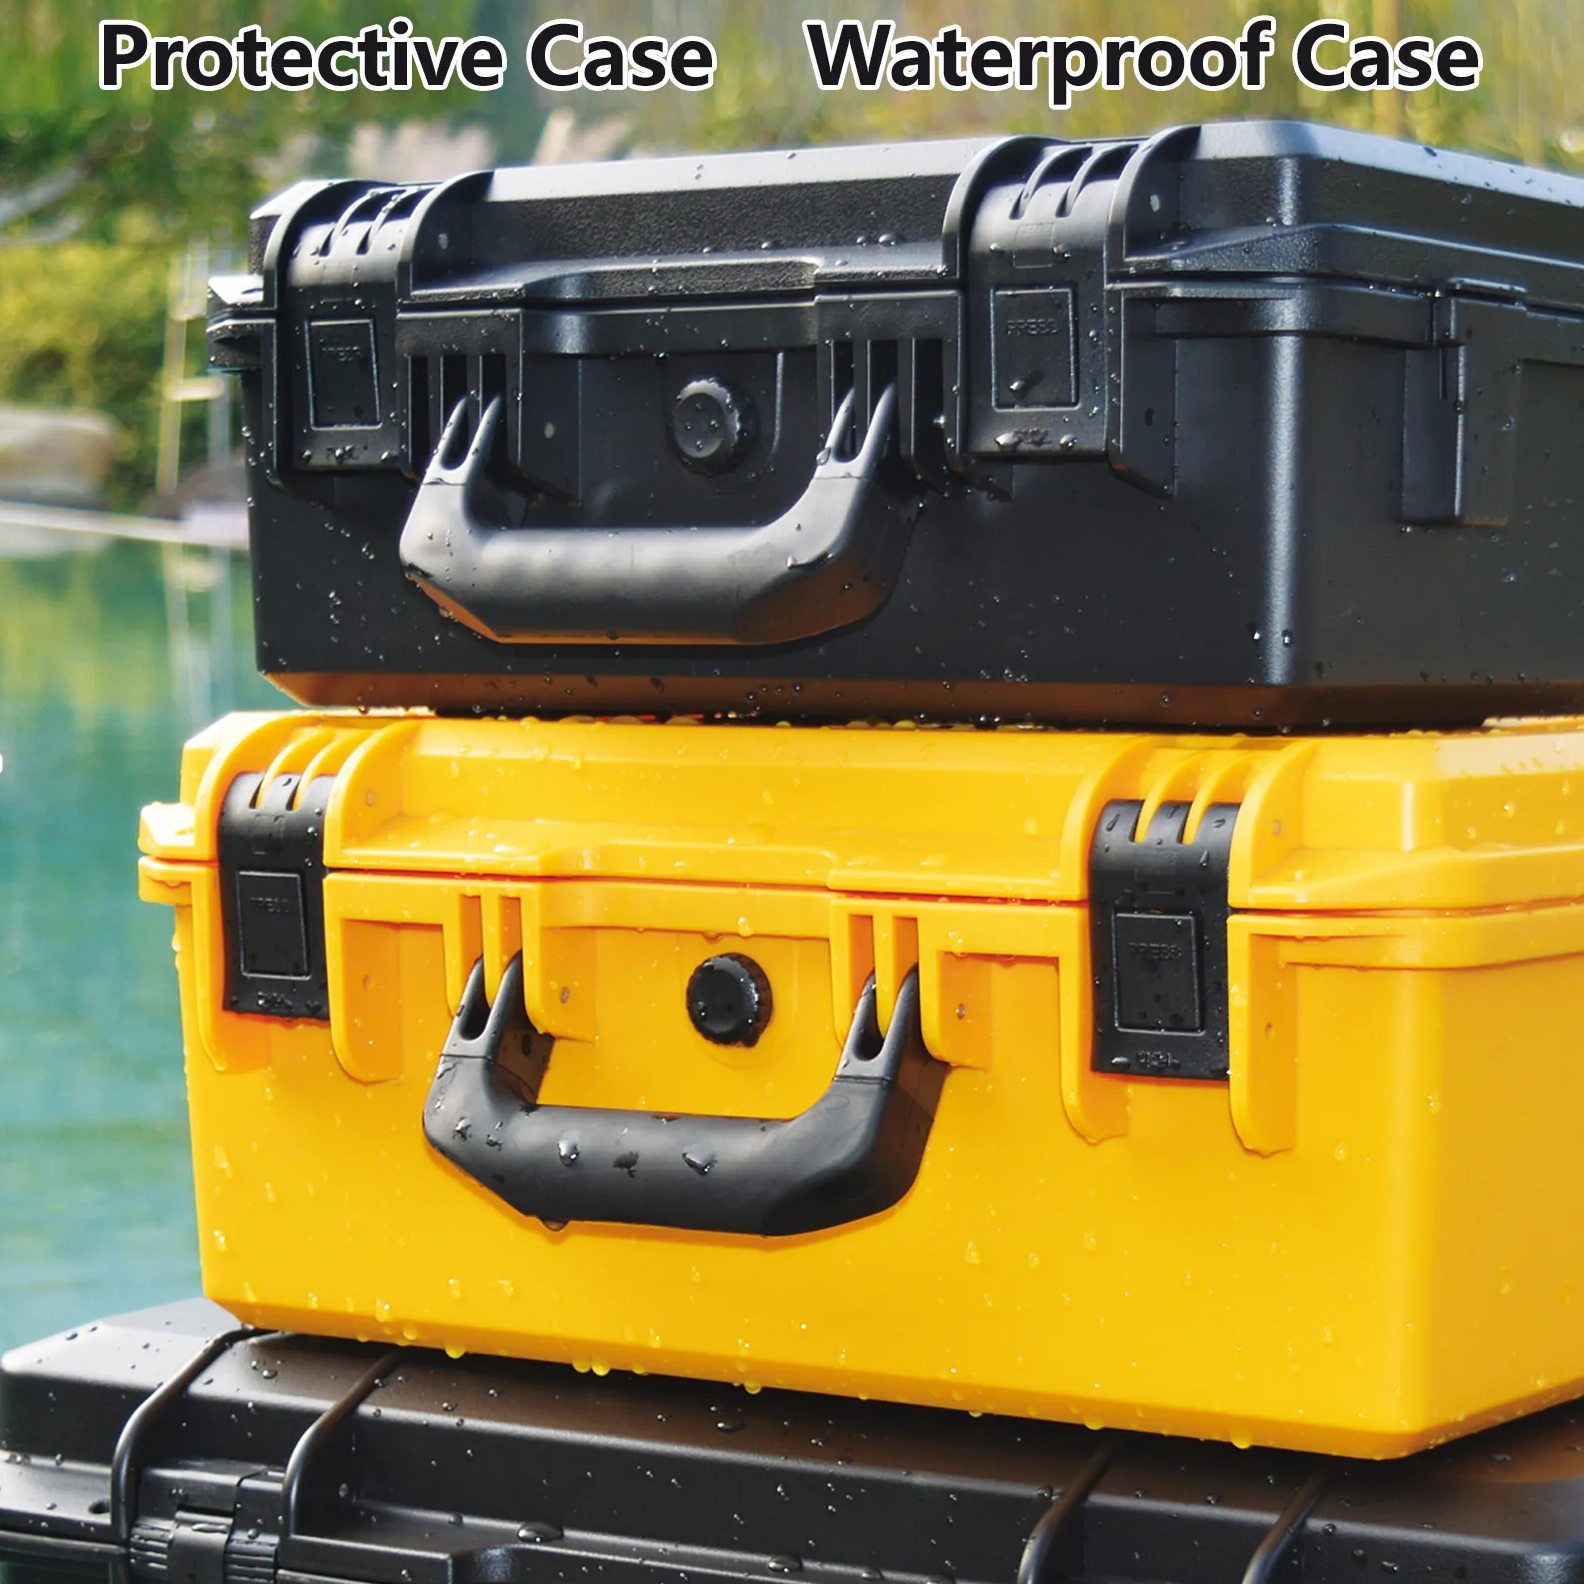 The Ultimate Protection: Hard, Waterproof, and Plastic Cases